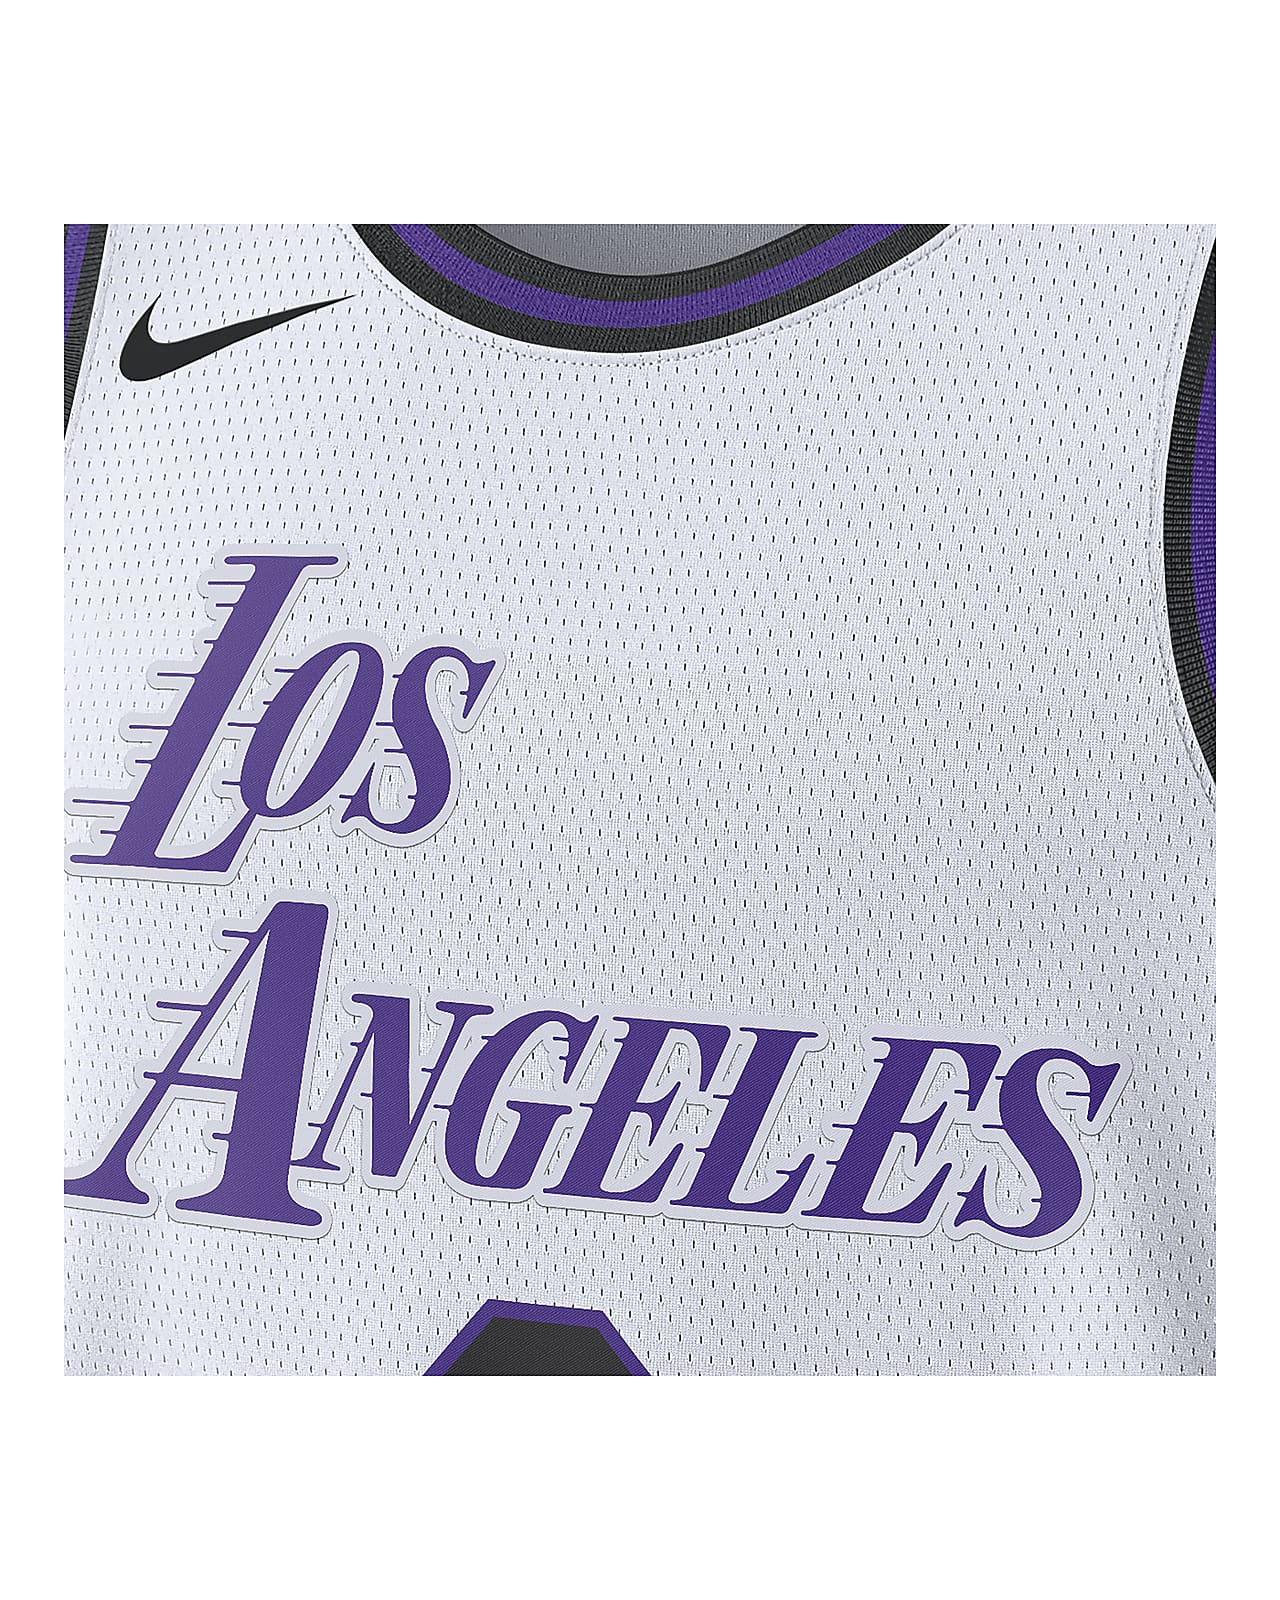 nike lakers city edition jersey